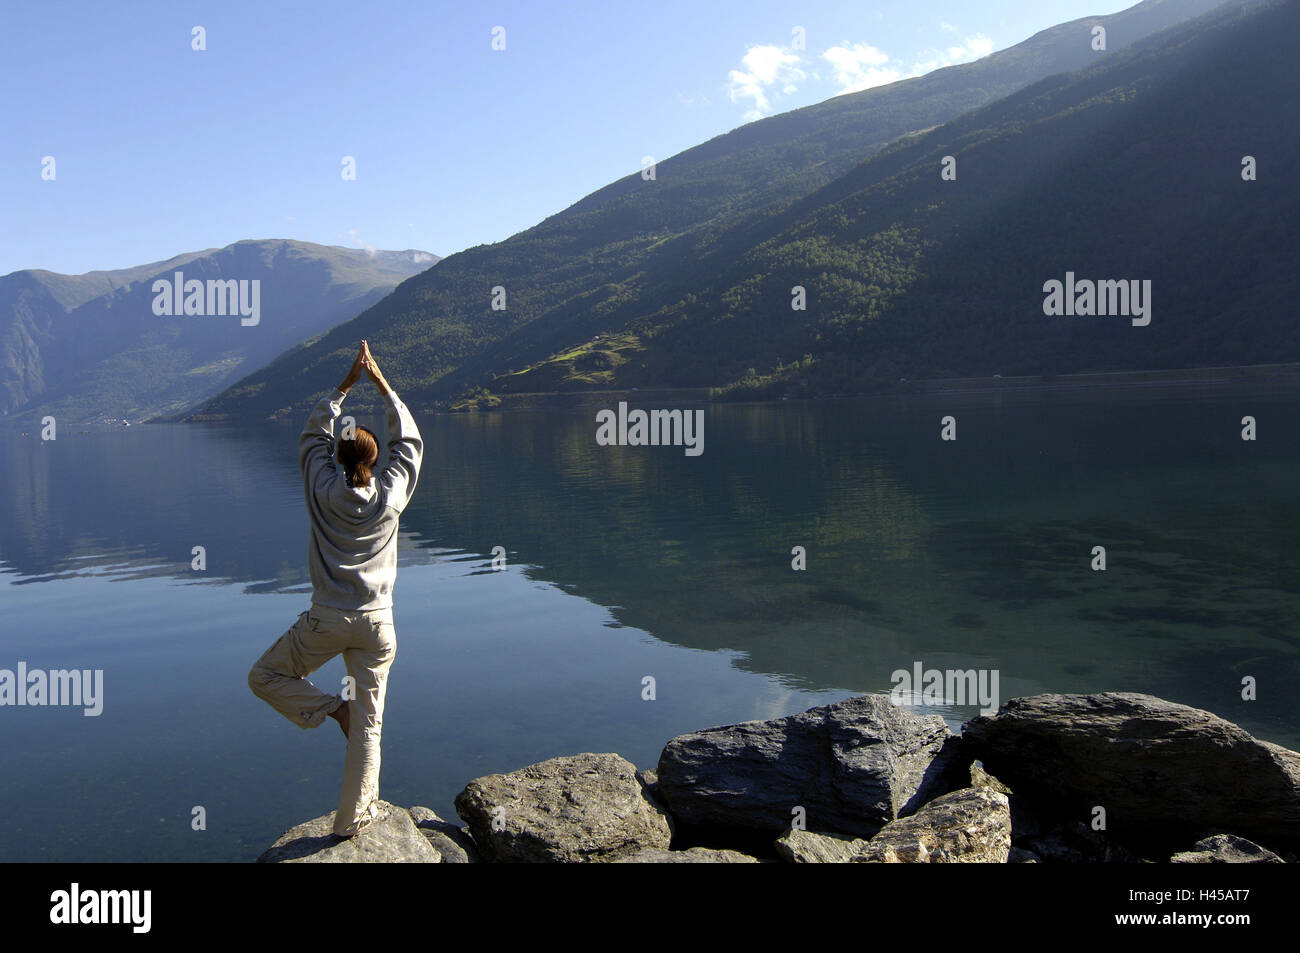 Norway, mountain lake, rock-coast, woman, yoga practice, gets along back view, series fjord-country Aurlandsfjord people meditation, Yoga, practice, 'the tree', relaxation, recuperation, concentration, harmony, relaxation, balance, stress-reduction, health, well-being, body-feeling, unison, Lifestyle, outside, leisure time, balance, silence, energy, energy-river, Yogaposition, balance, balance, full-length, barefoot, Stock Photo